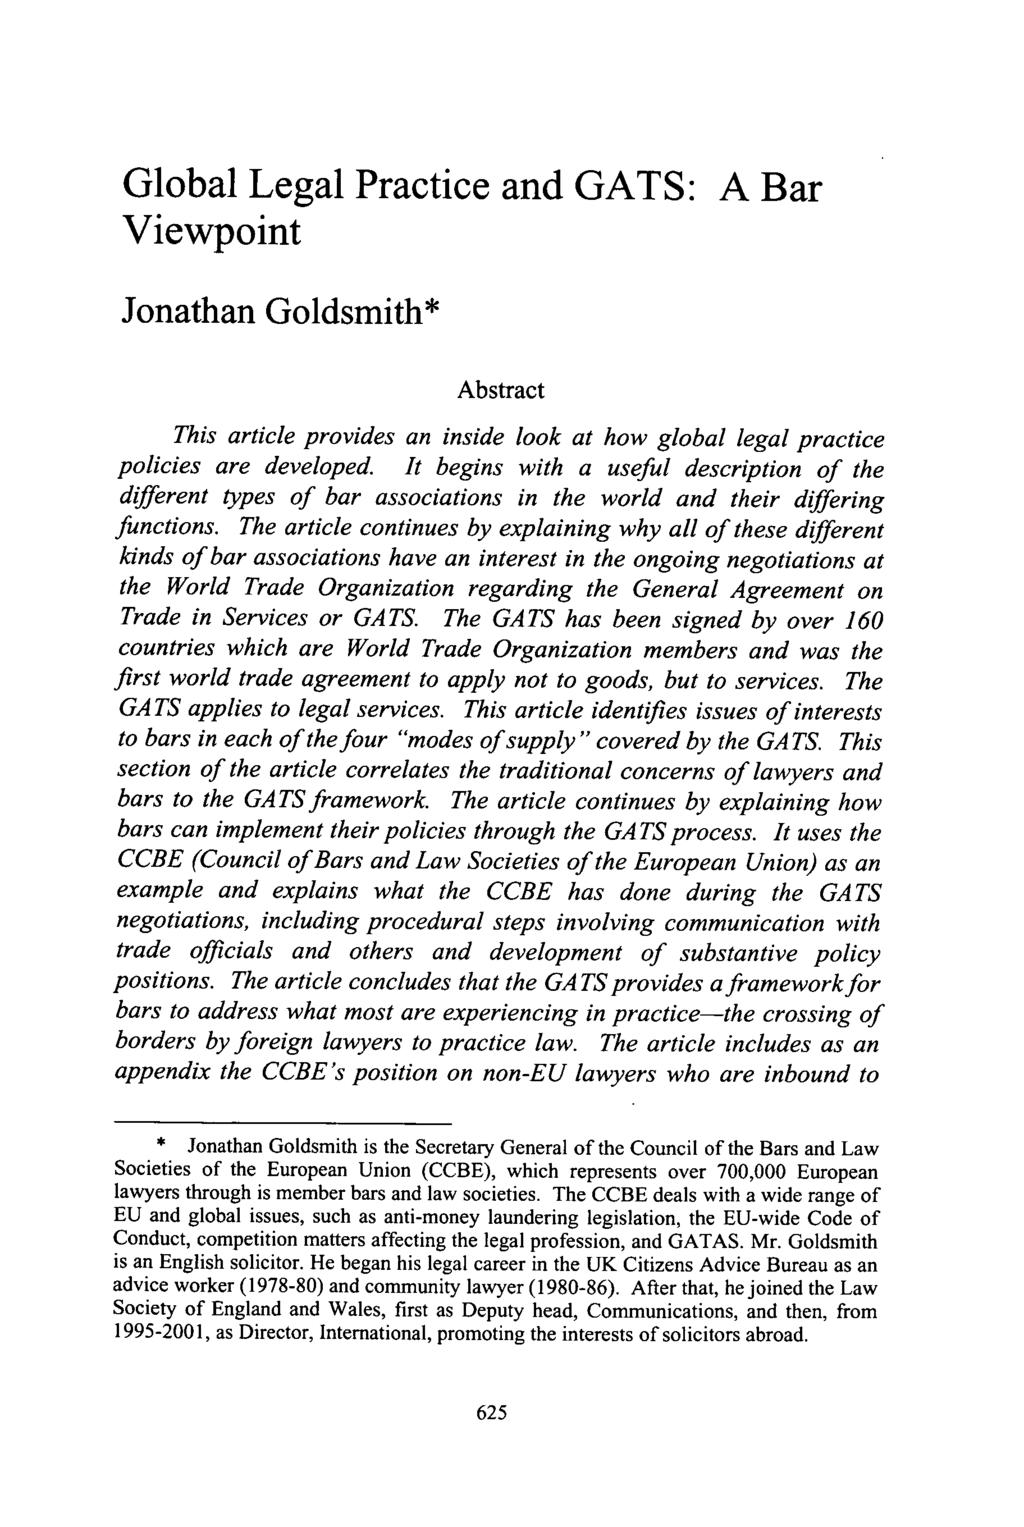 Global Legal Practice and GATS: A Bar Viewpoint Jonathan Goldsmith* Abstract This article provides an inside look at how global legal practice policies are developed.